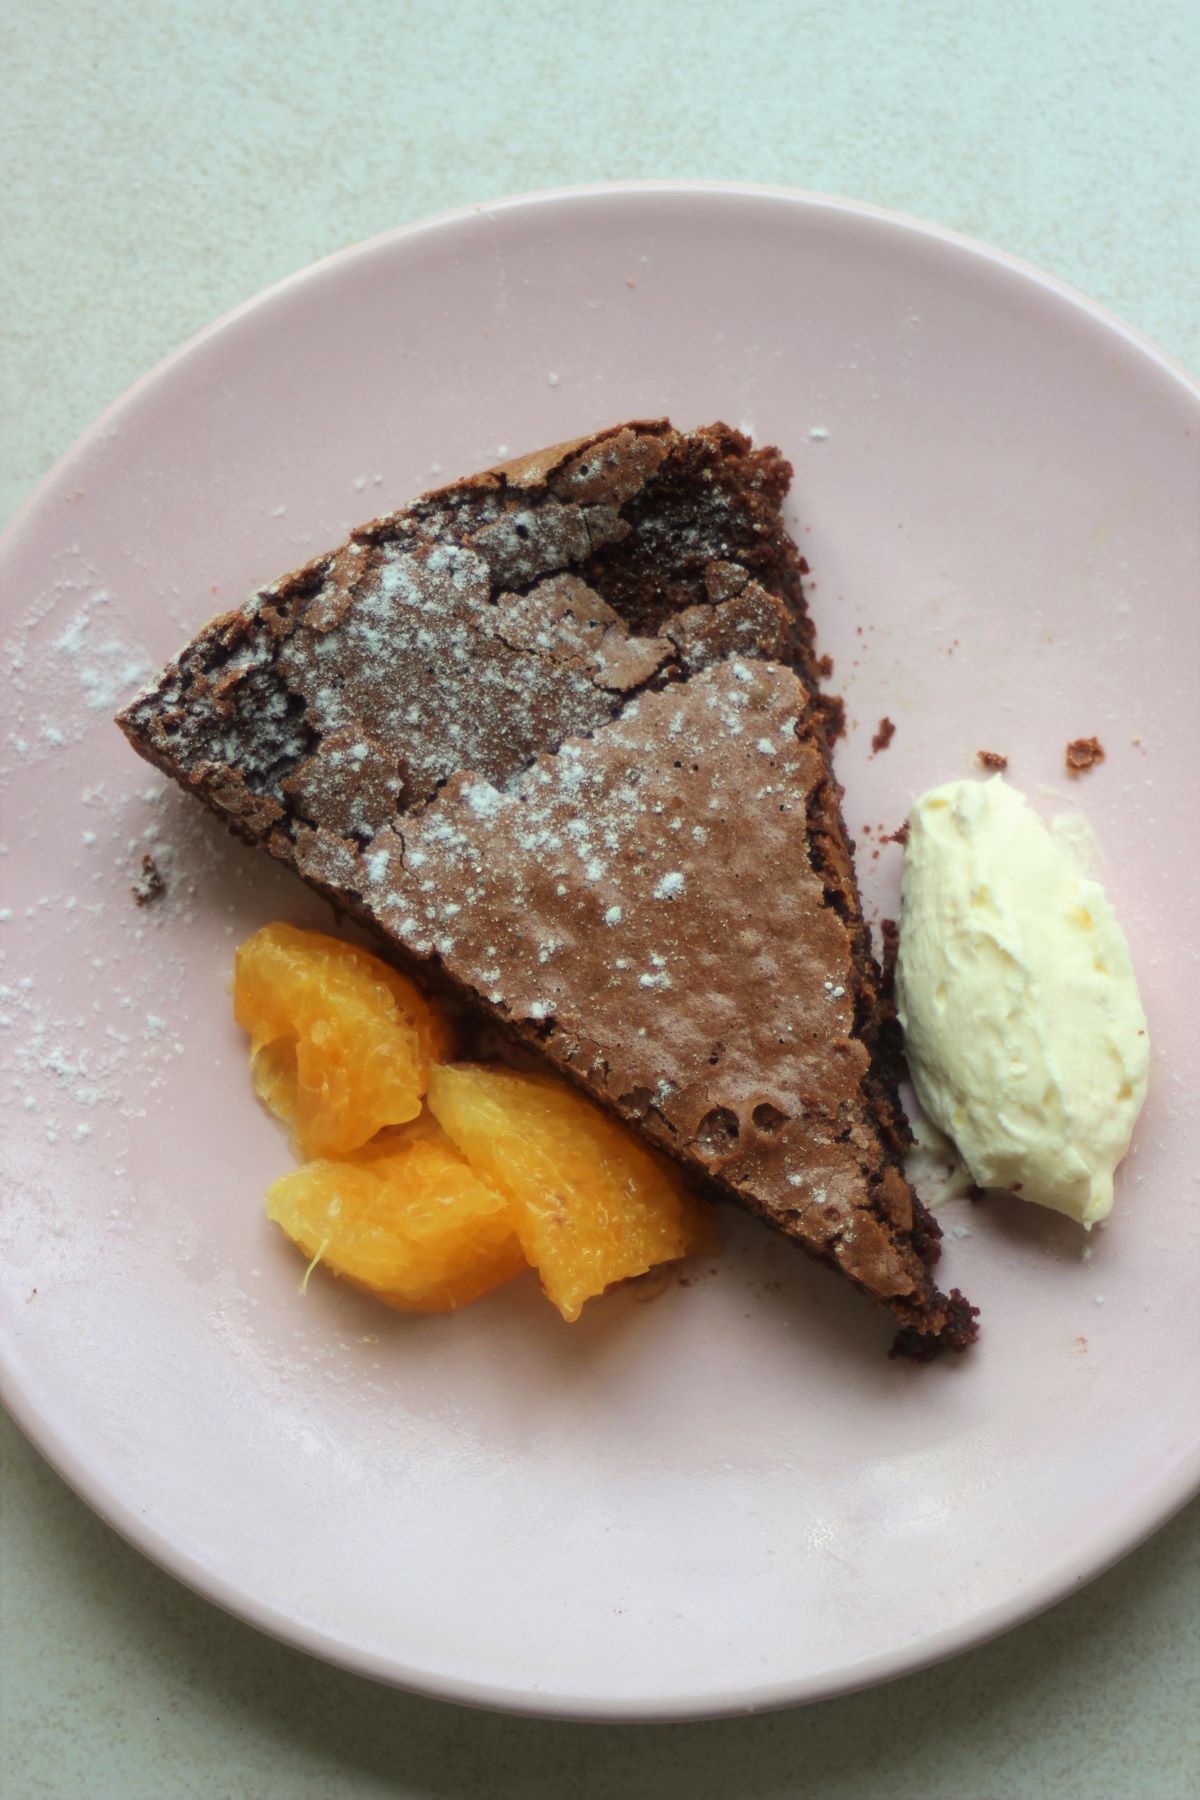 A portion of chocolate cake with oranges slices and whipped cream on a pink plate.